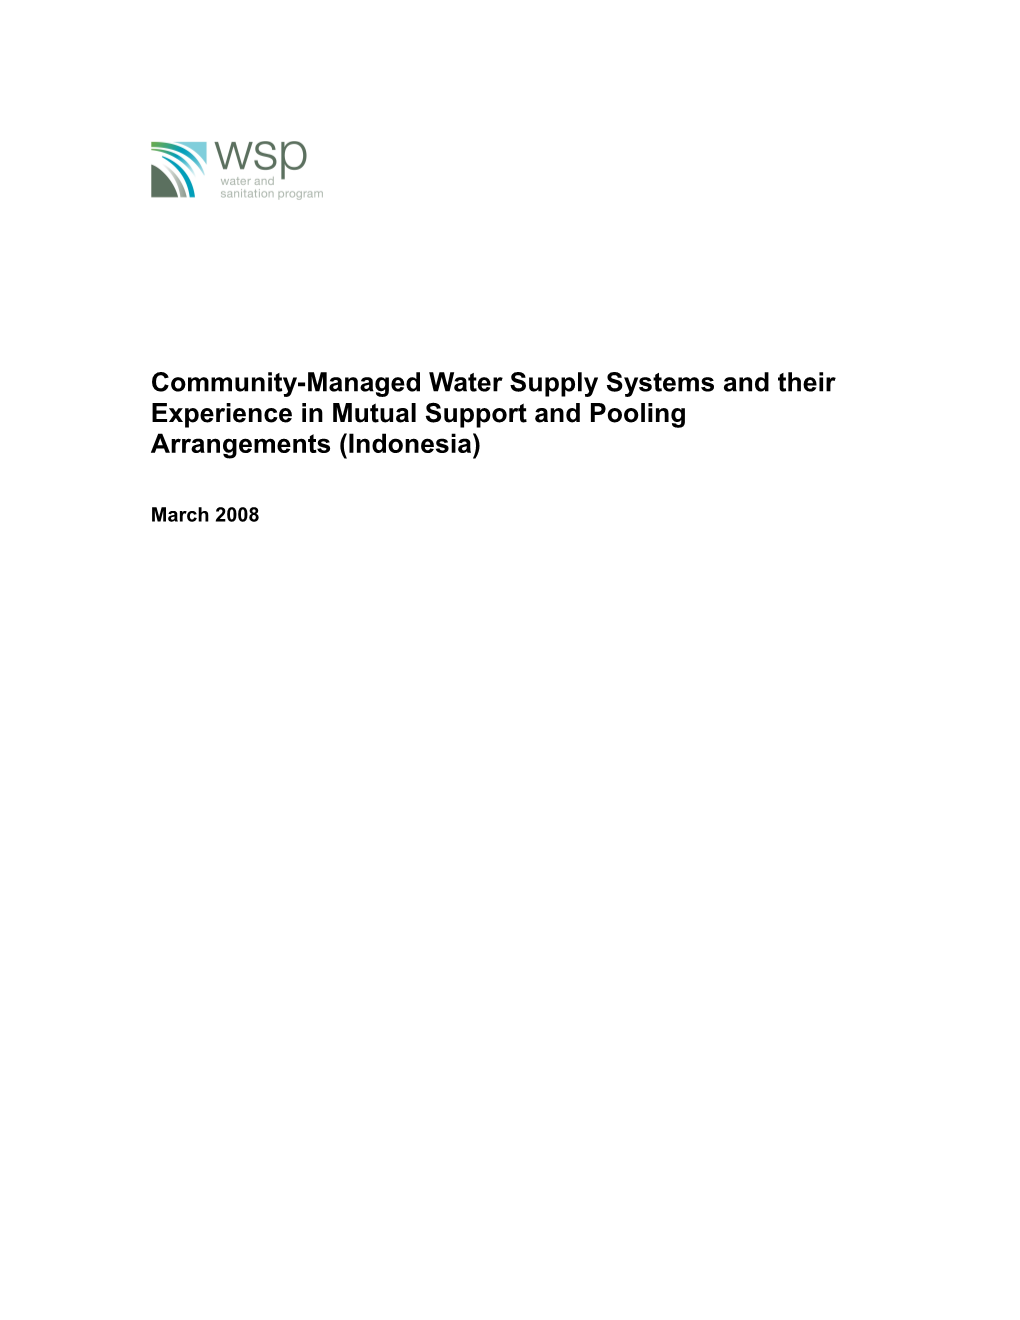 Community Managed Systems Often Do Well on the Day-To-Day Manag